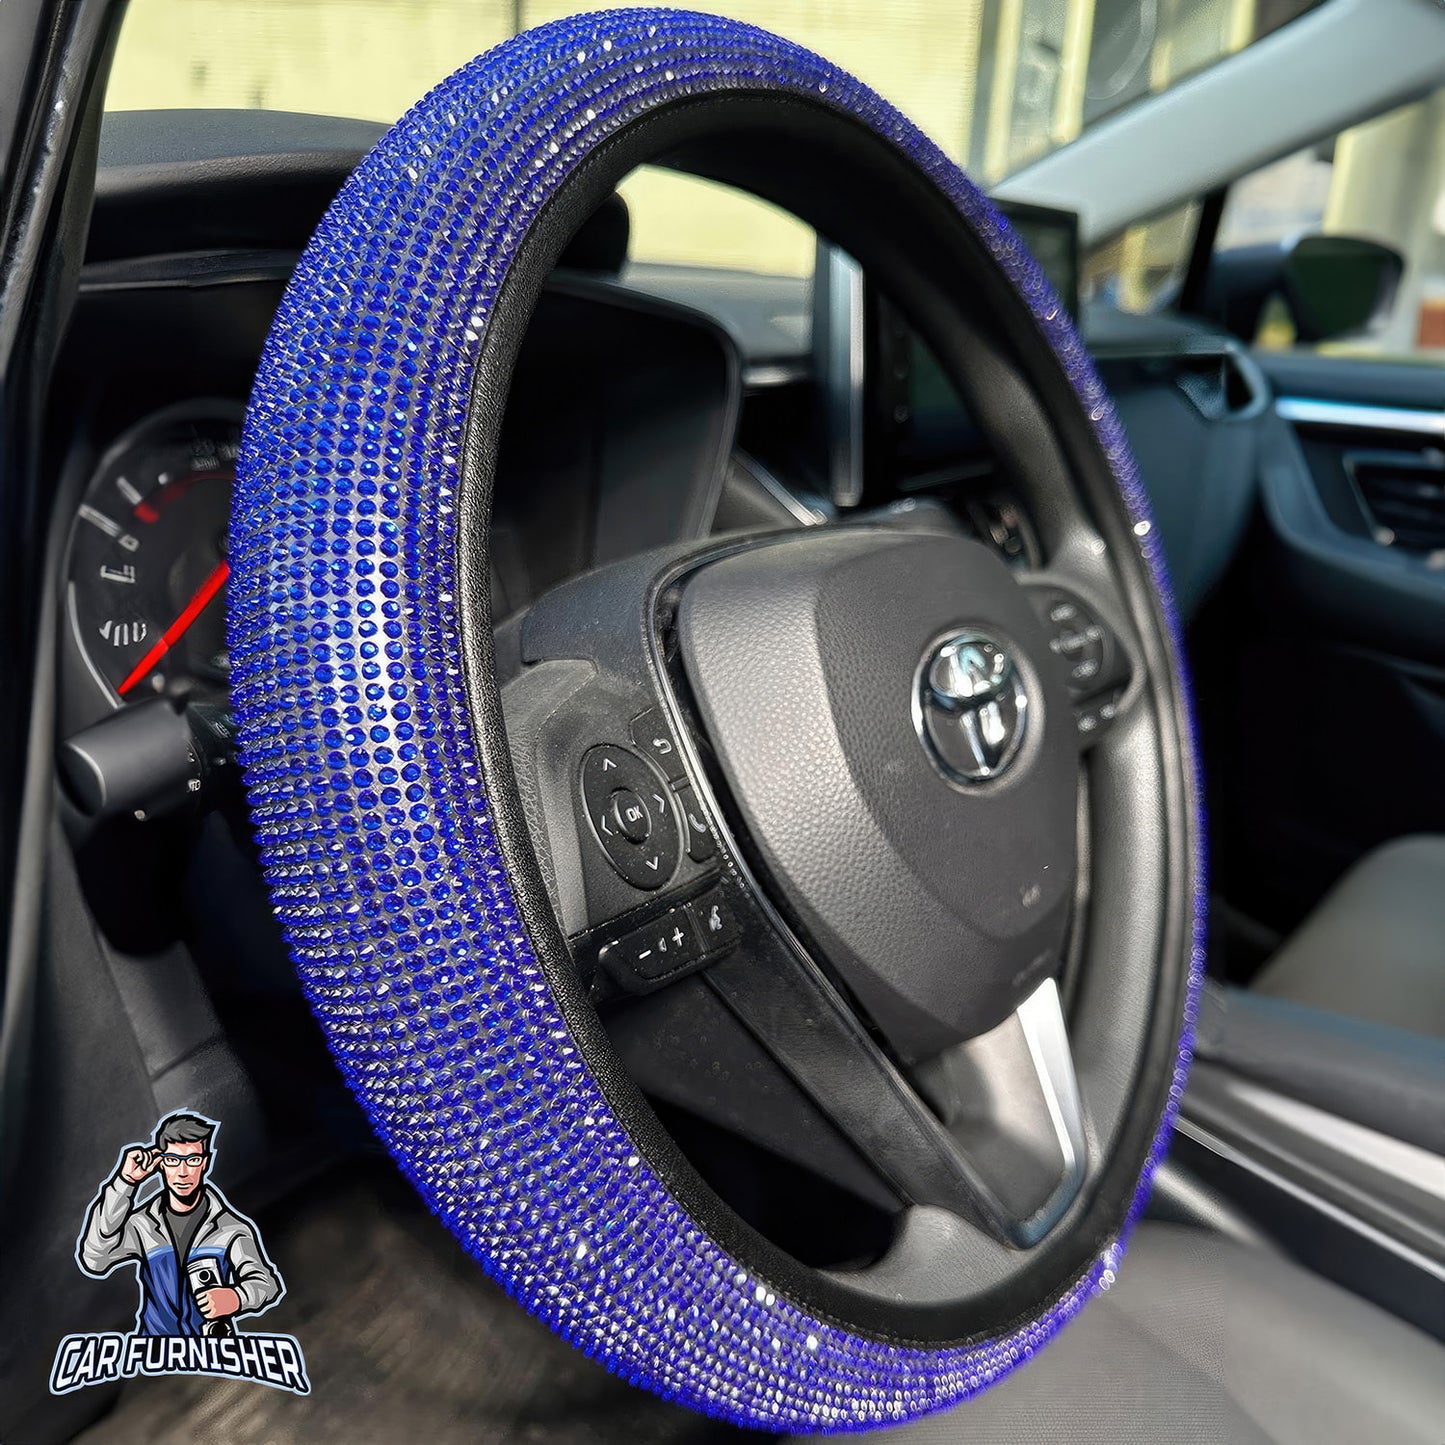 Steering Wheel Cover - Full Stone Shiny Look Blue Leather & Fabric